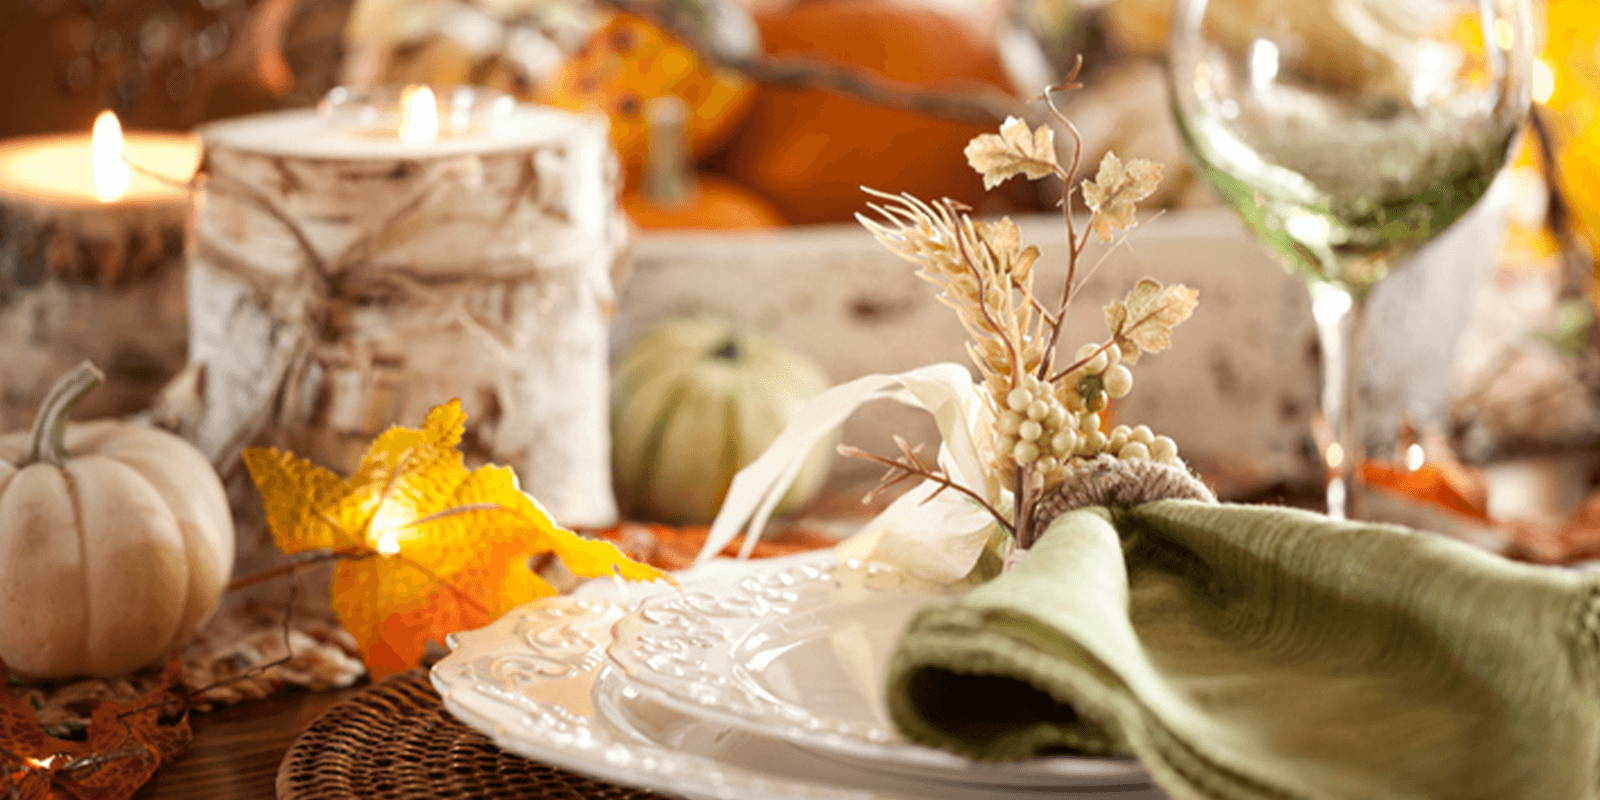 Fall-inspired table setting.